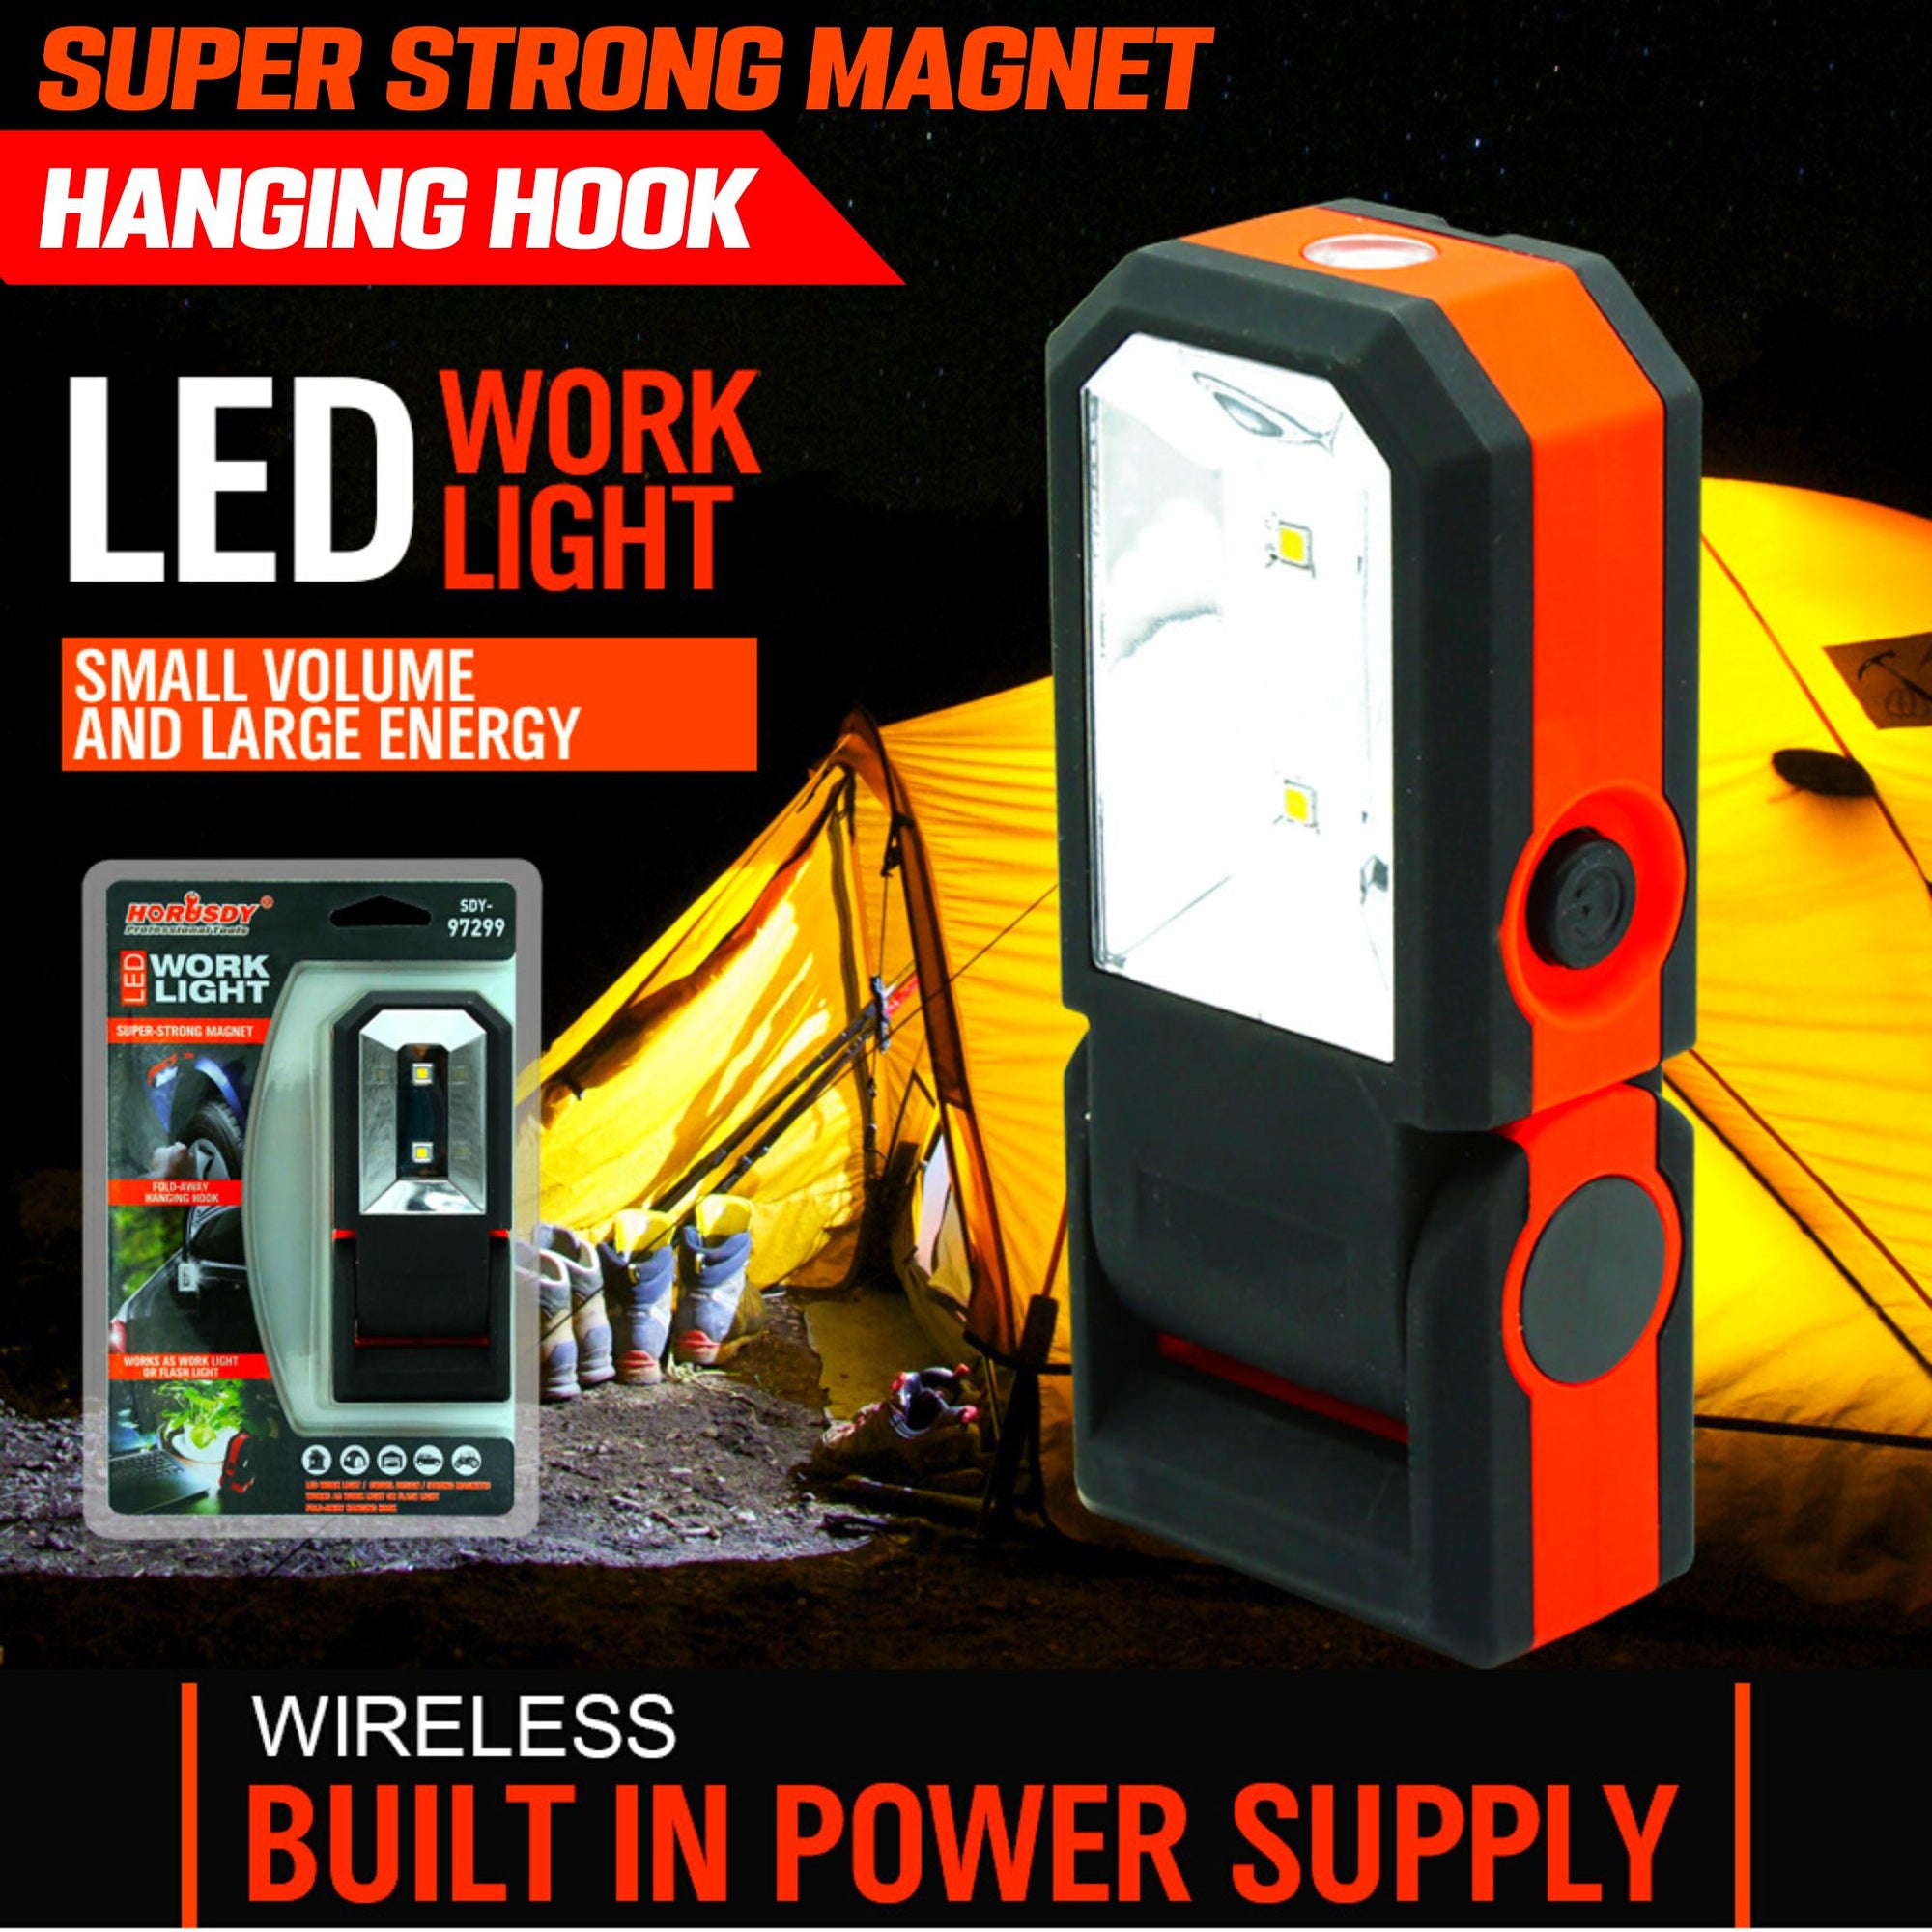 LED Work Light - South East Clearance Centre